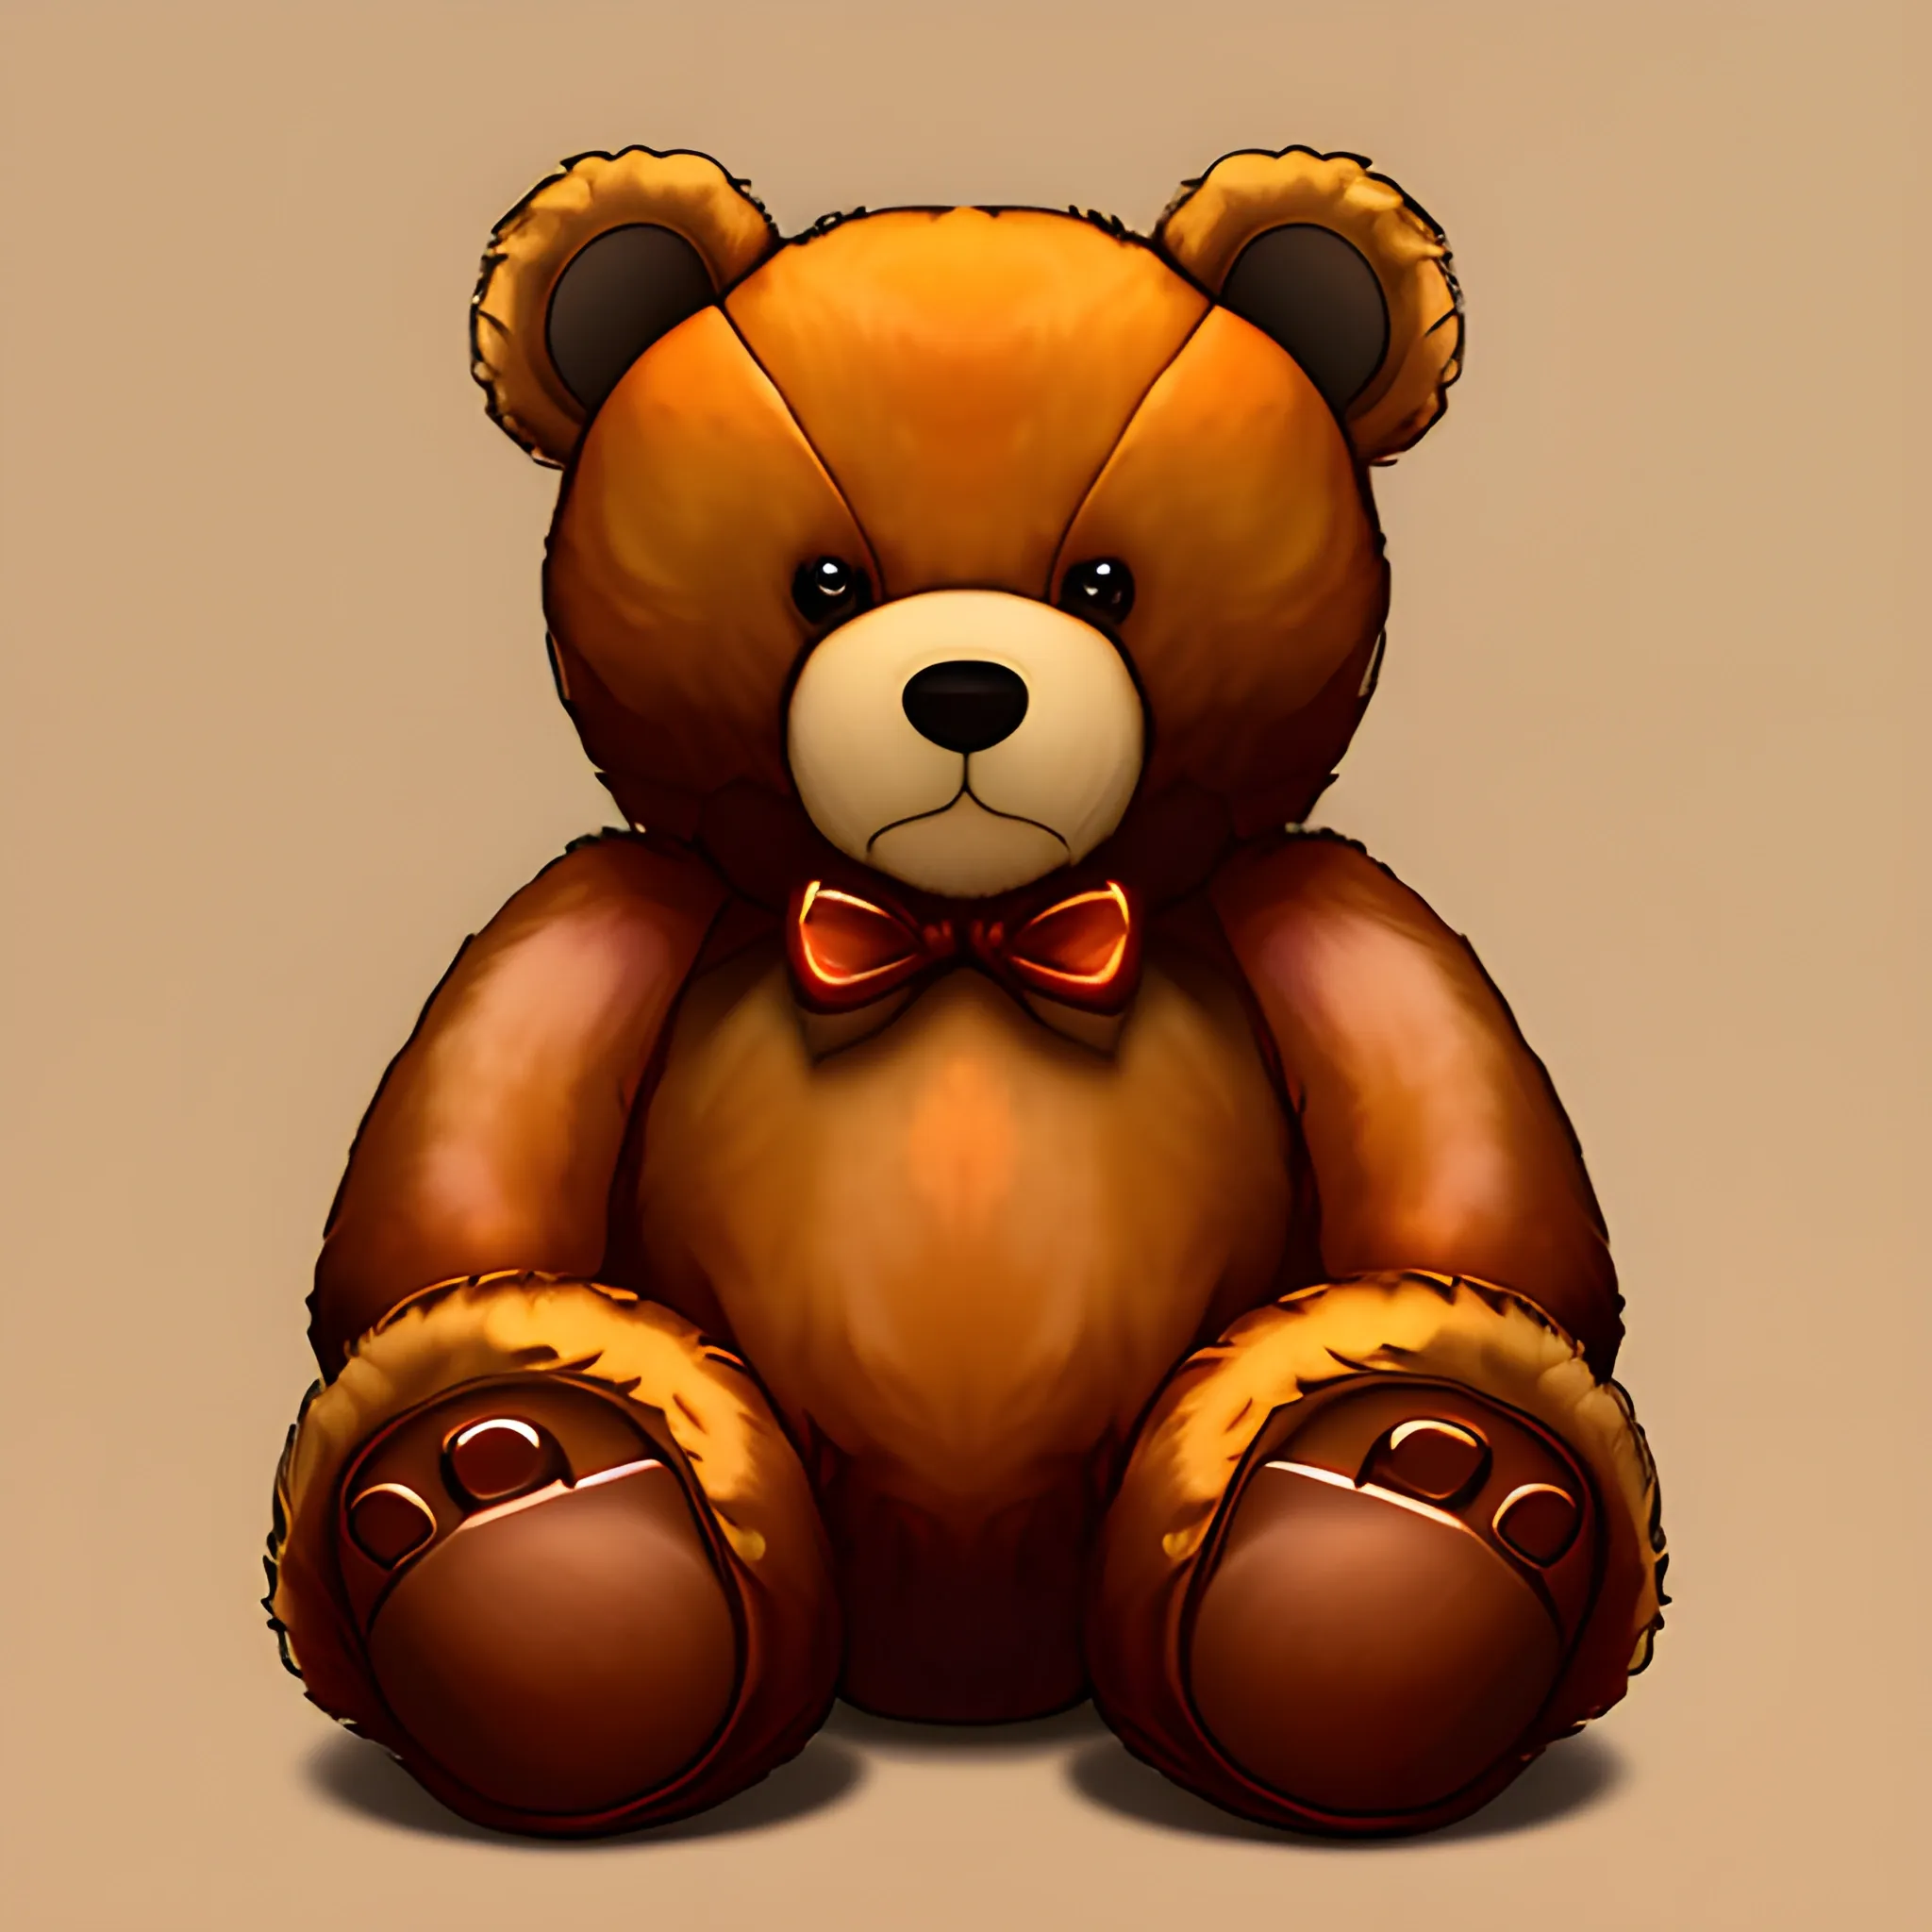 illustration of small whole teddy bear with three-quarter view looking to the side with side light, digital painting style with warm colors